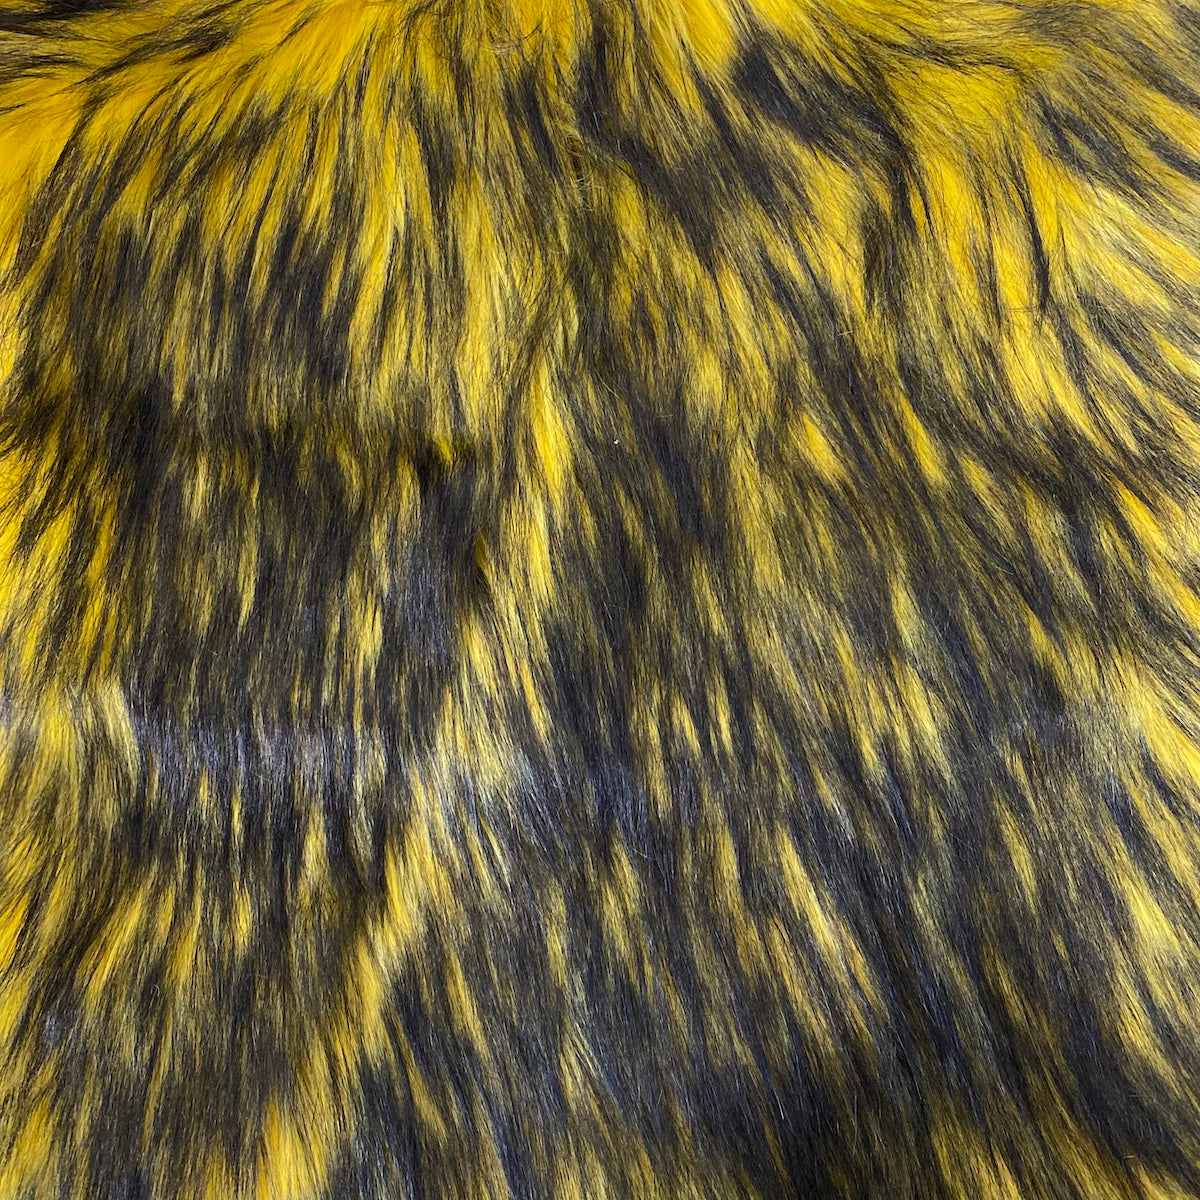 Lime Green Black Husky Long Pile Shaggy Faux Fur Fabric - Sold By